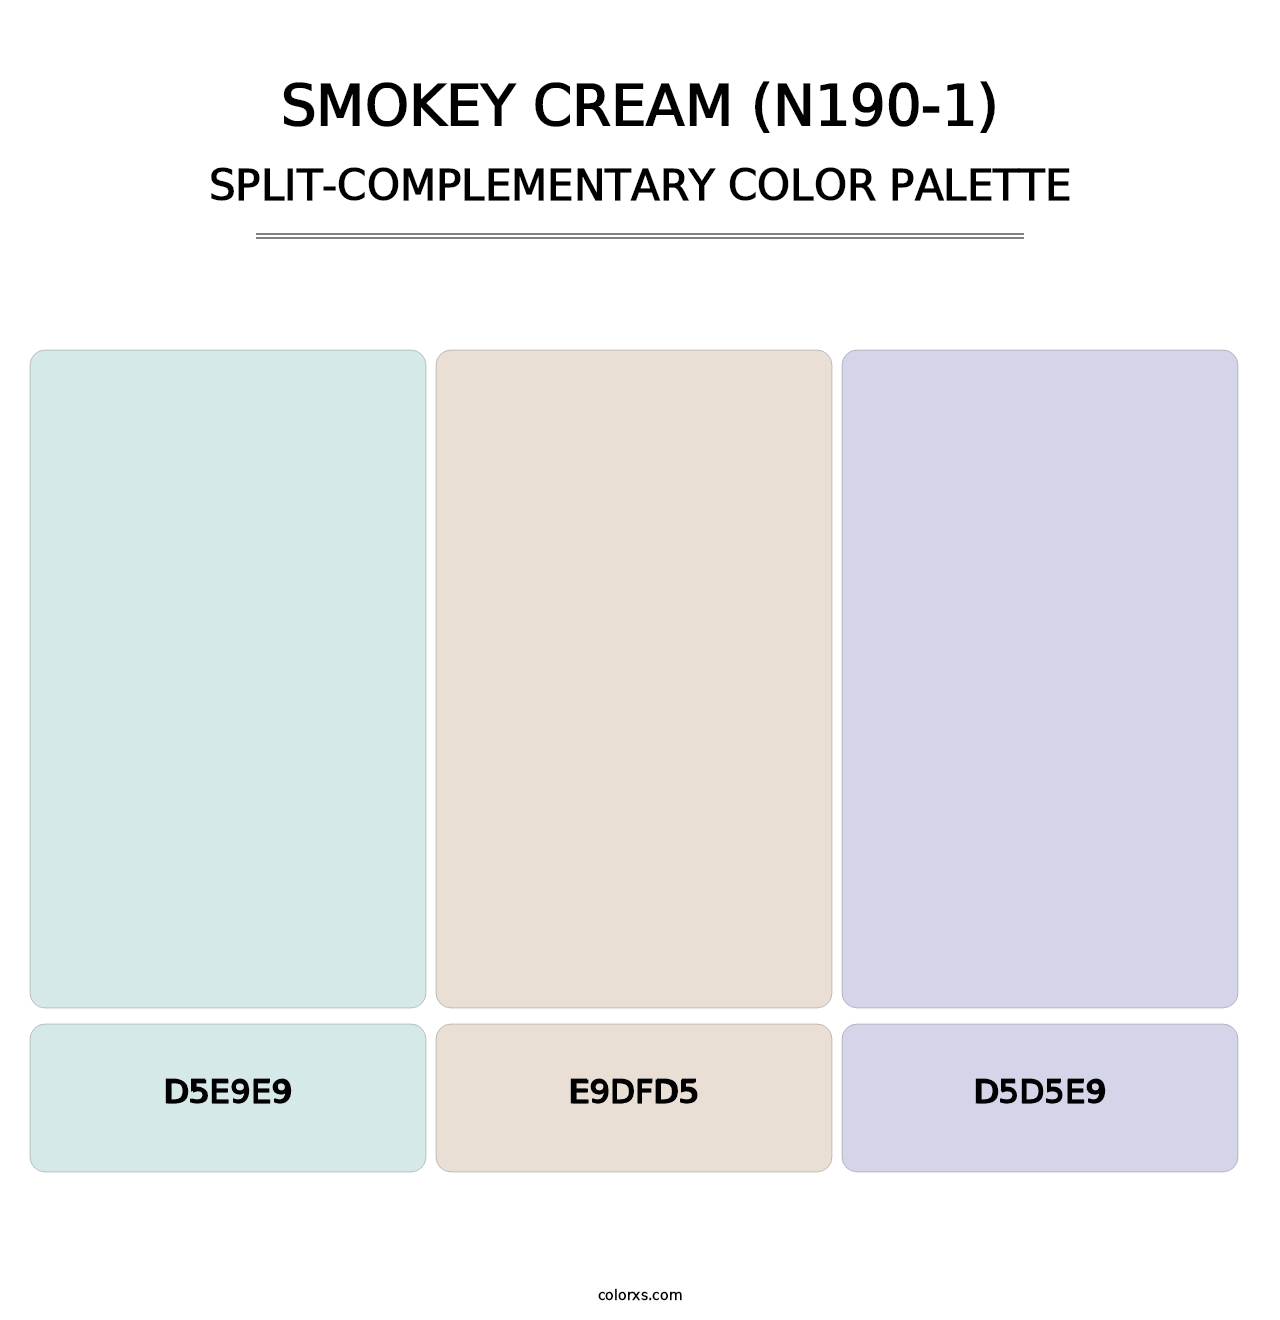 Smokey Cream (N190-1) - Split-Complementary Color Palette